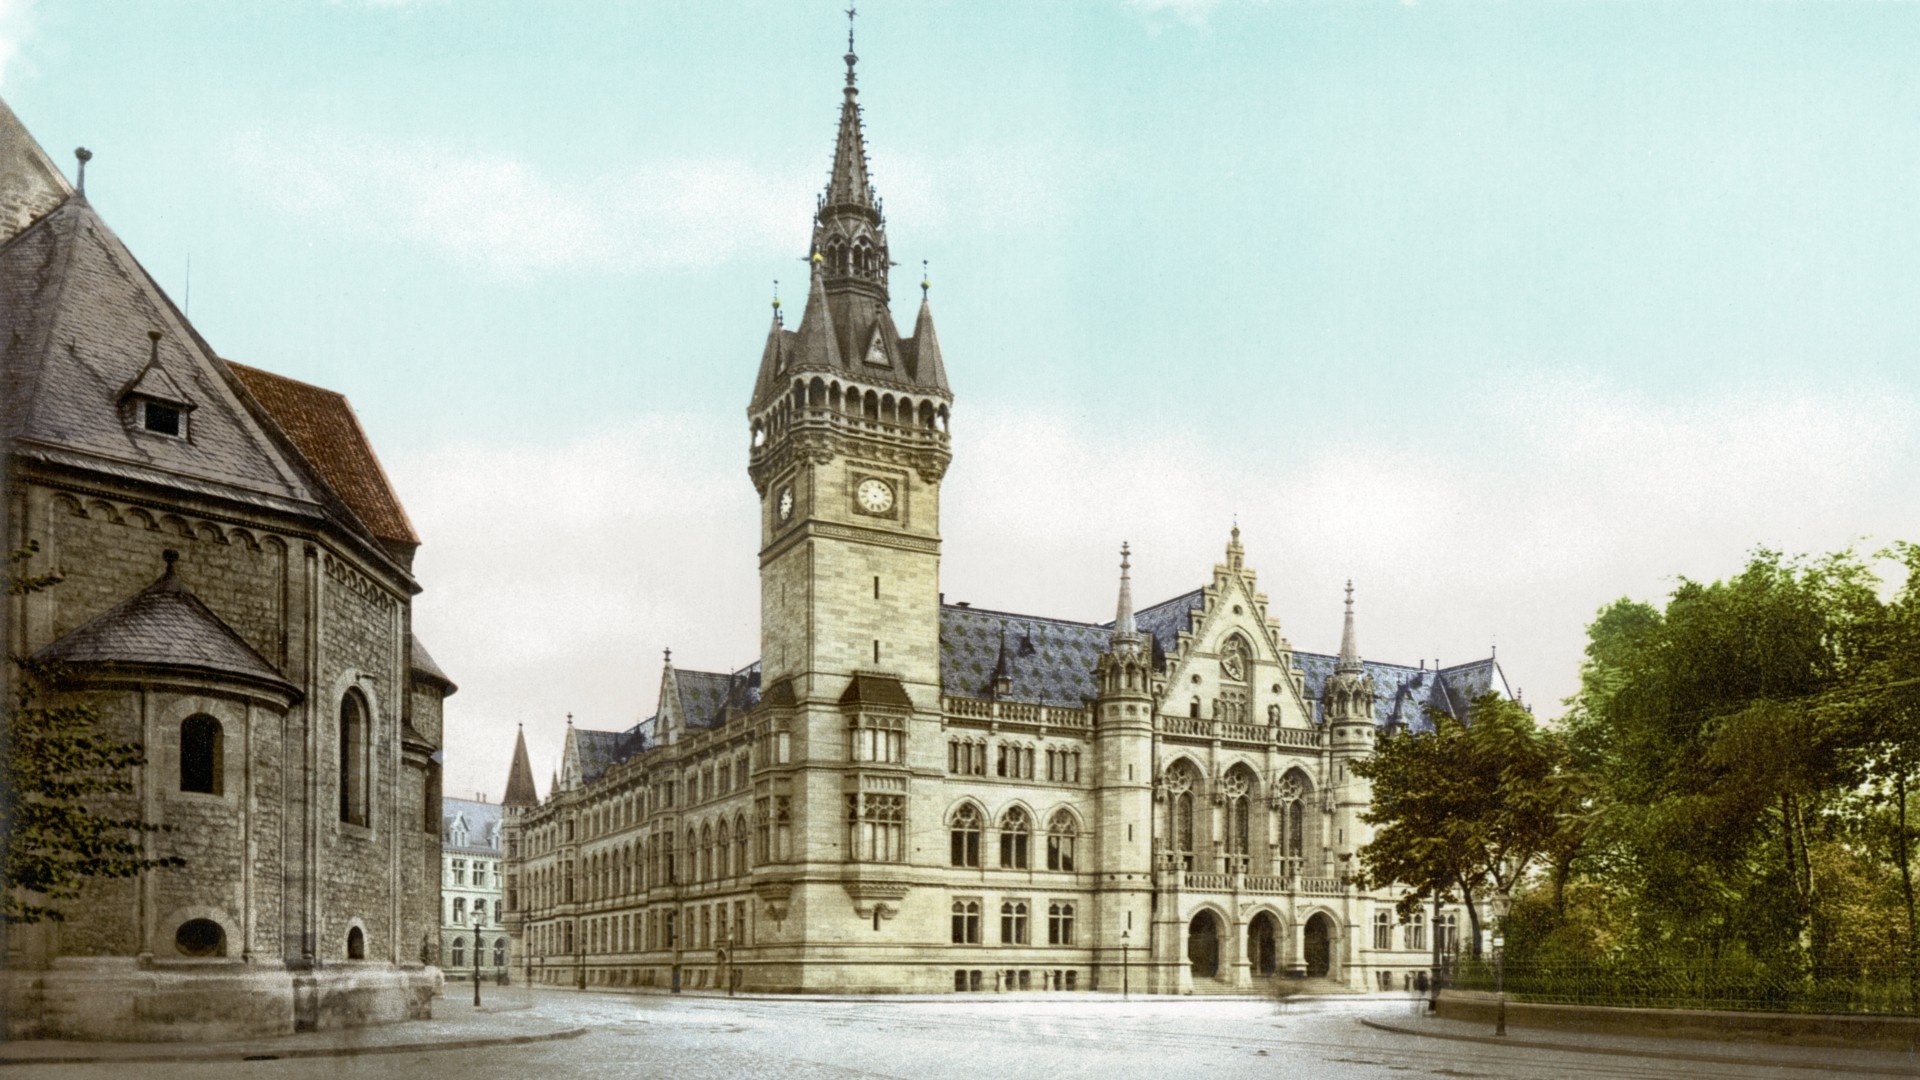 architecture, Building, Castle, Clouds, Tower, Trees, City, Braunschweig, Germany, Church, Colorized photos, History, Old, Town square, Empty, Old photos Wallpaper